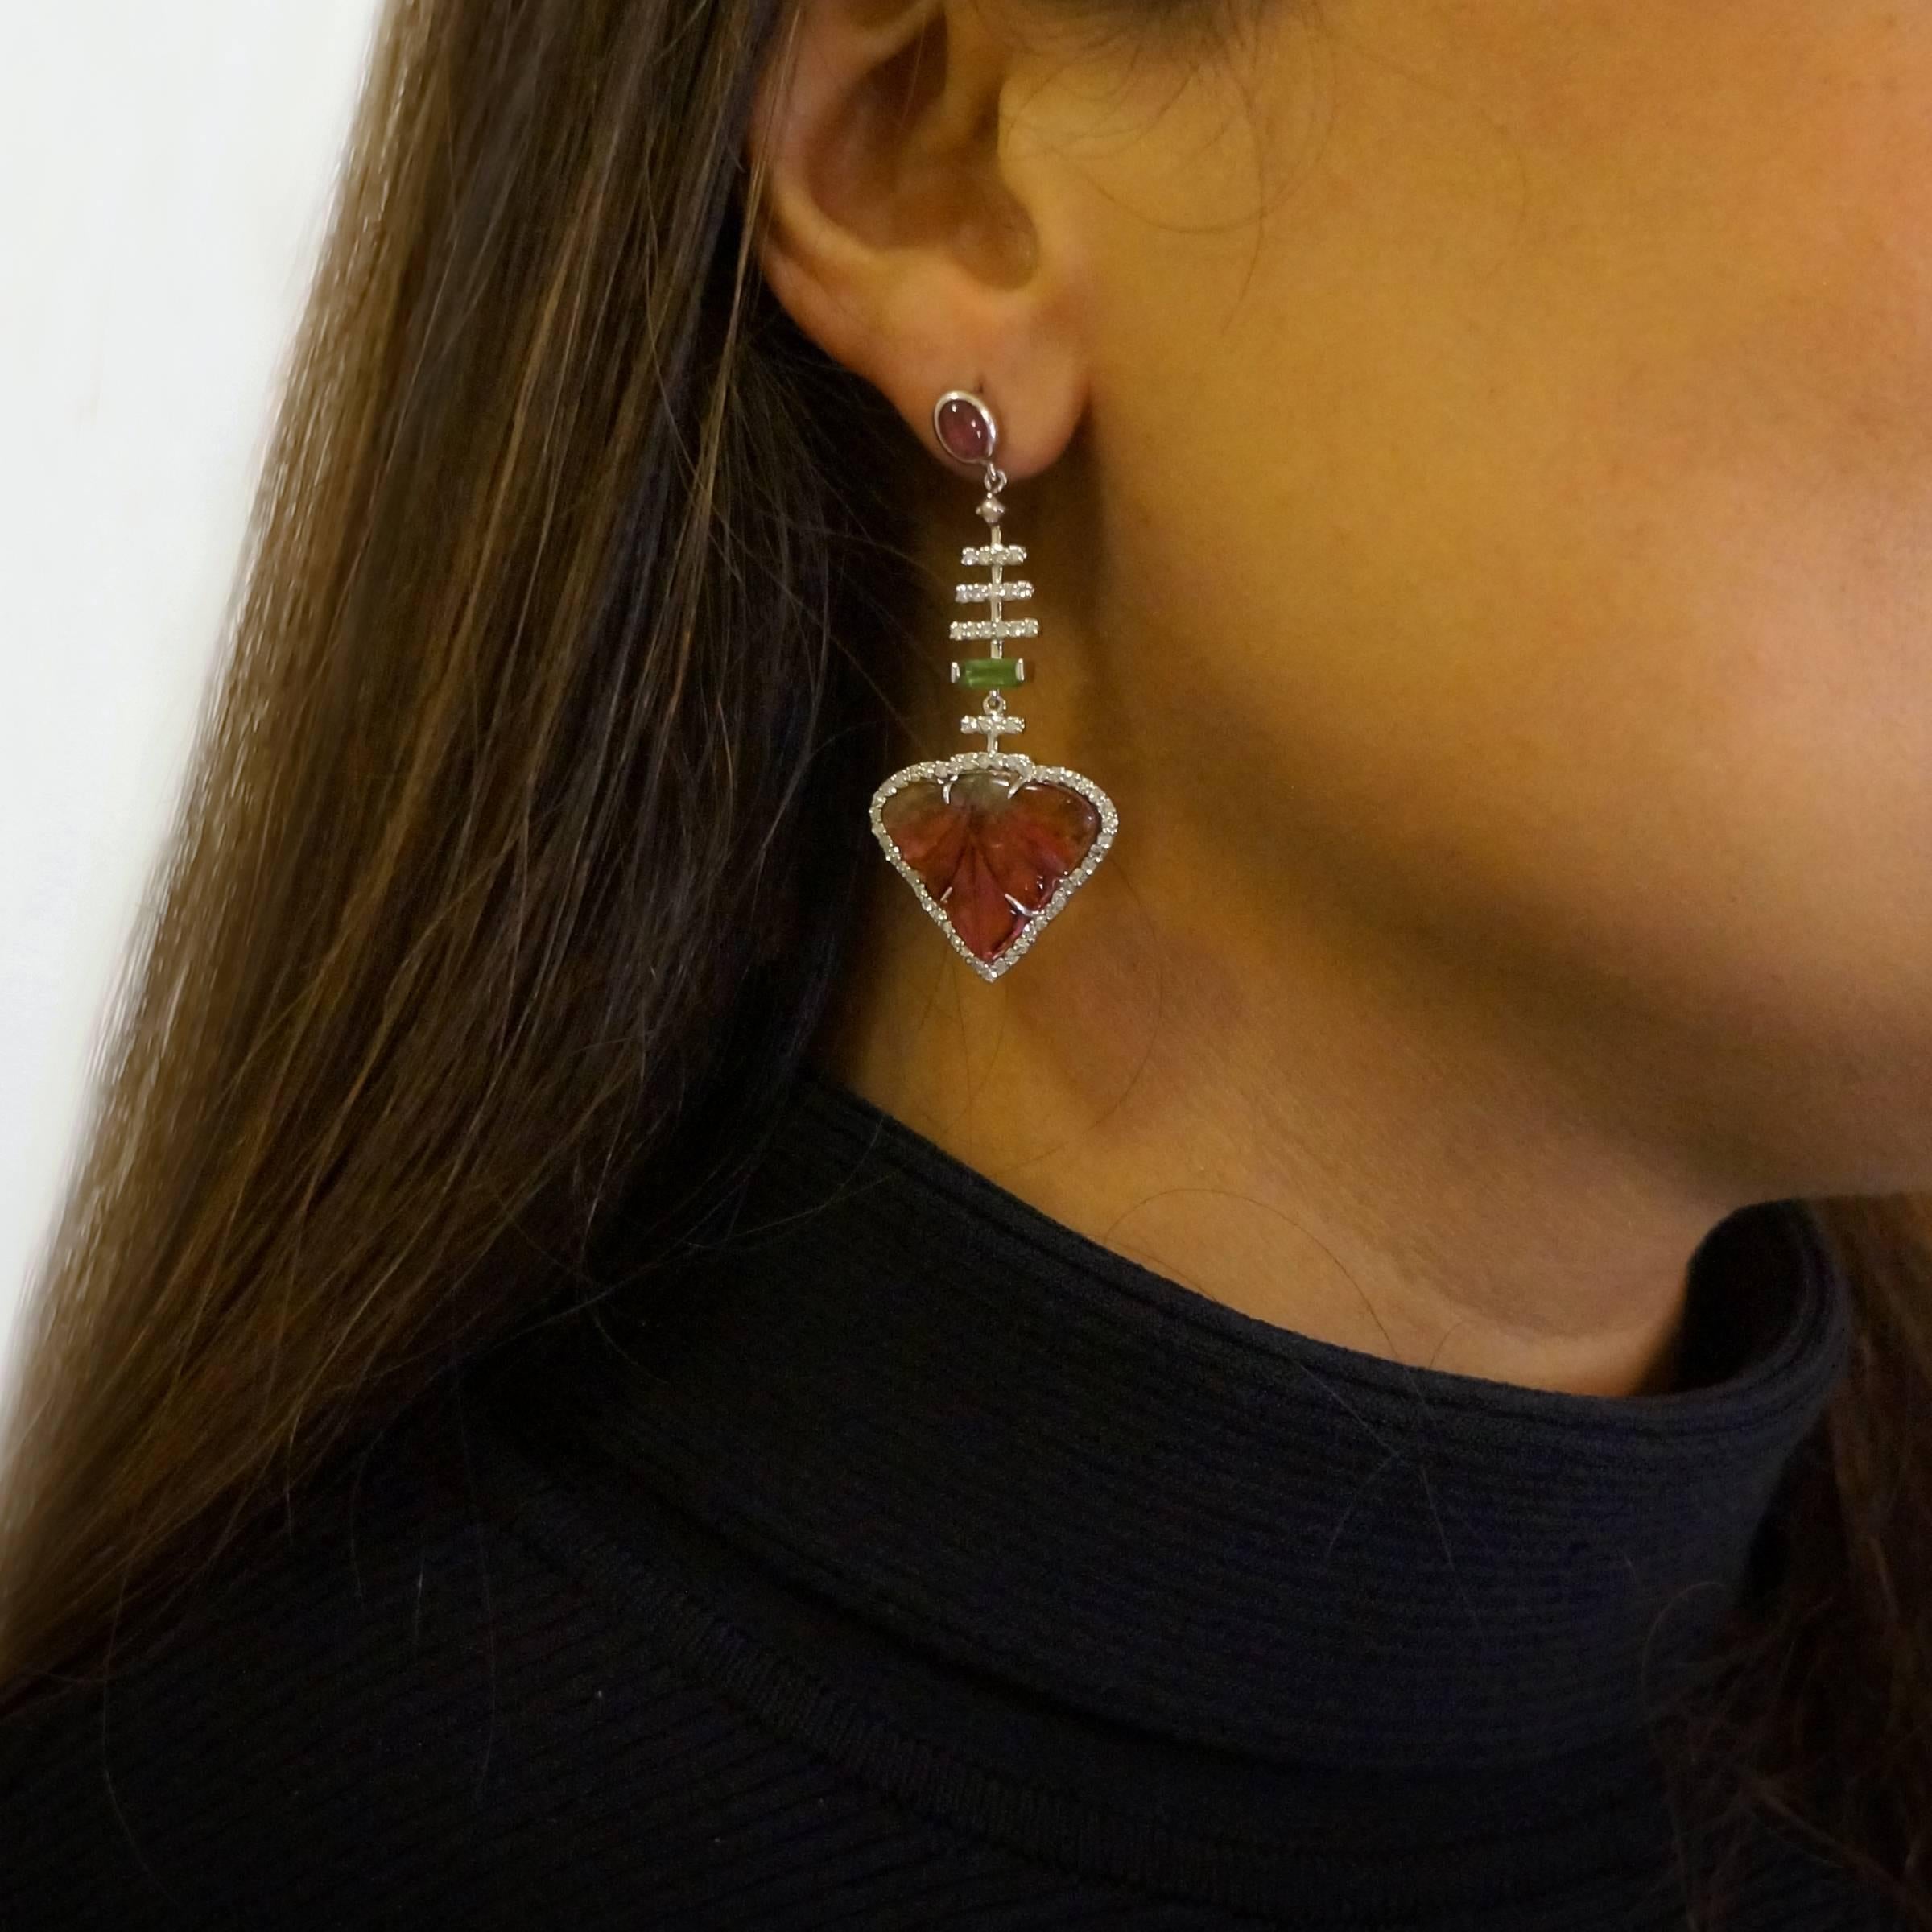 Capturing the stunning qualities of natural gemstones, Ri Noor's Carved Tourmaline Leaf and Diamond Drop Earrings feature a stunning display of artistry and sophistication. The earrings mix shapes and materials in a unique way which makes a special